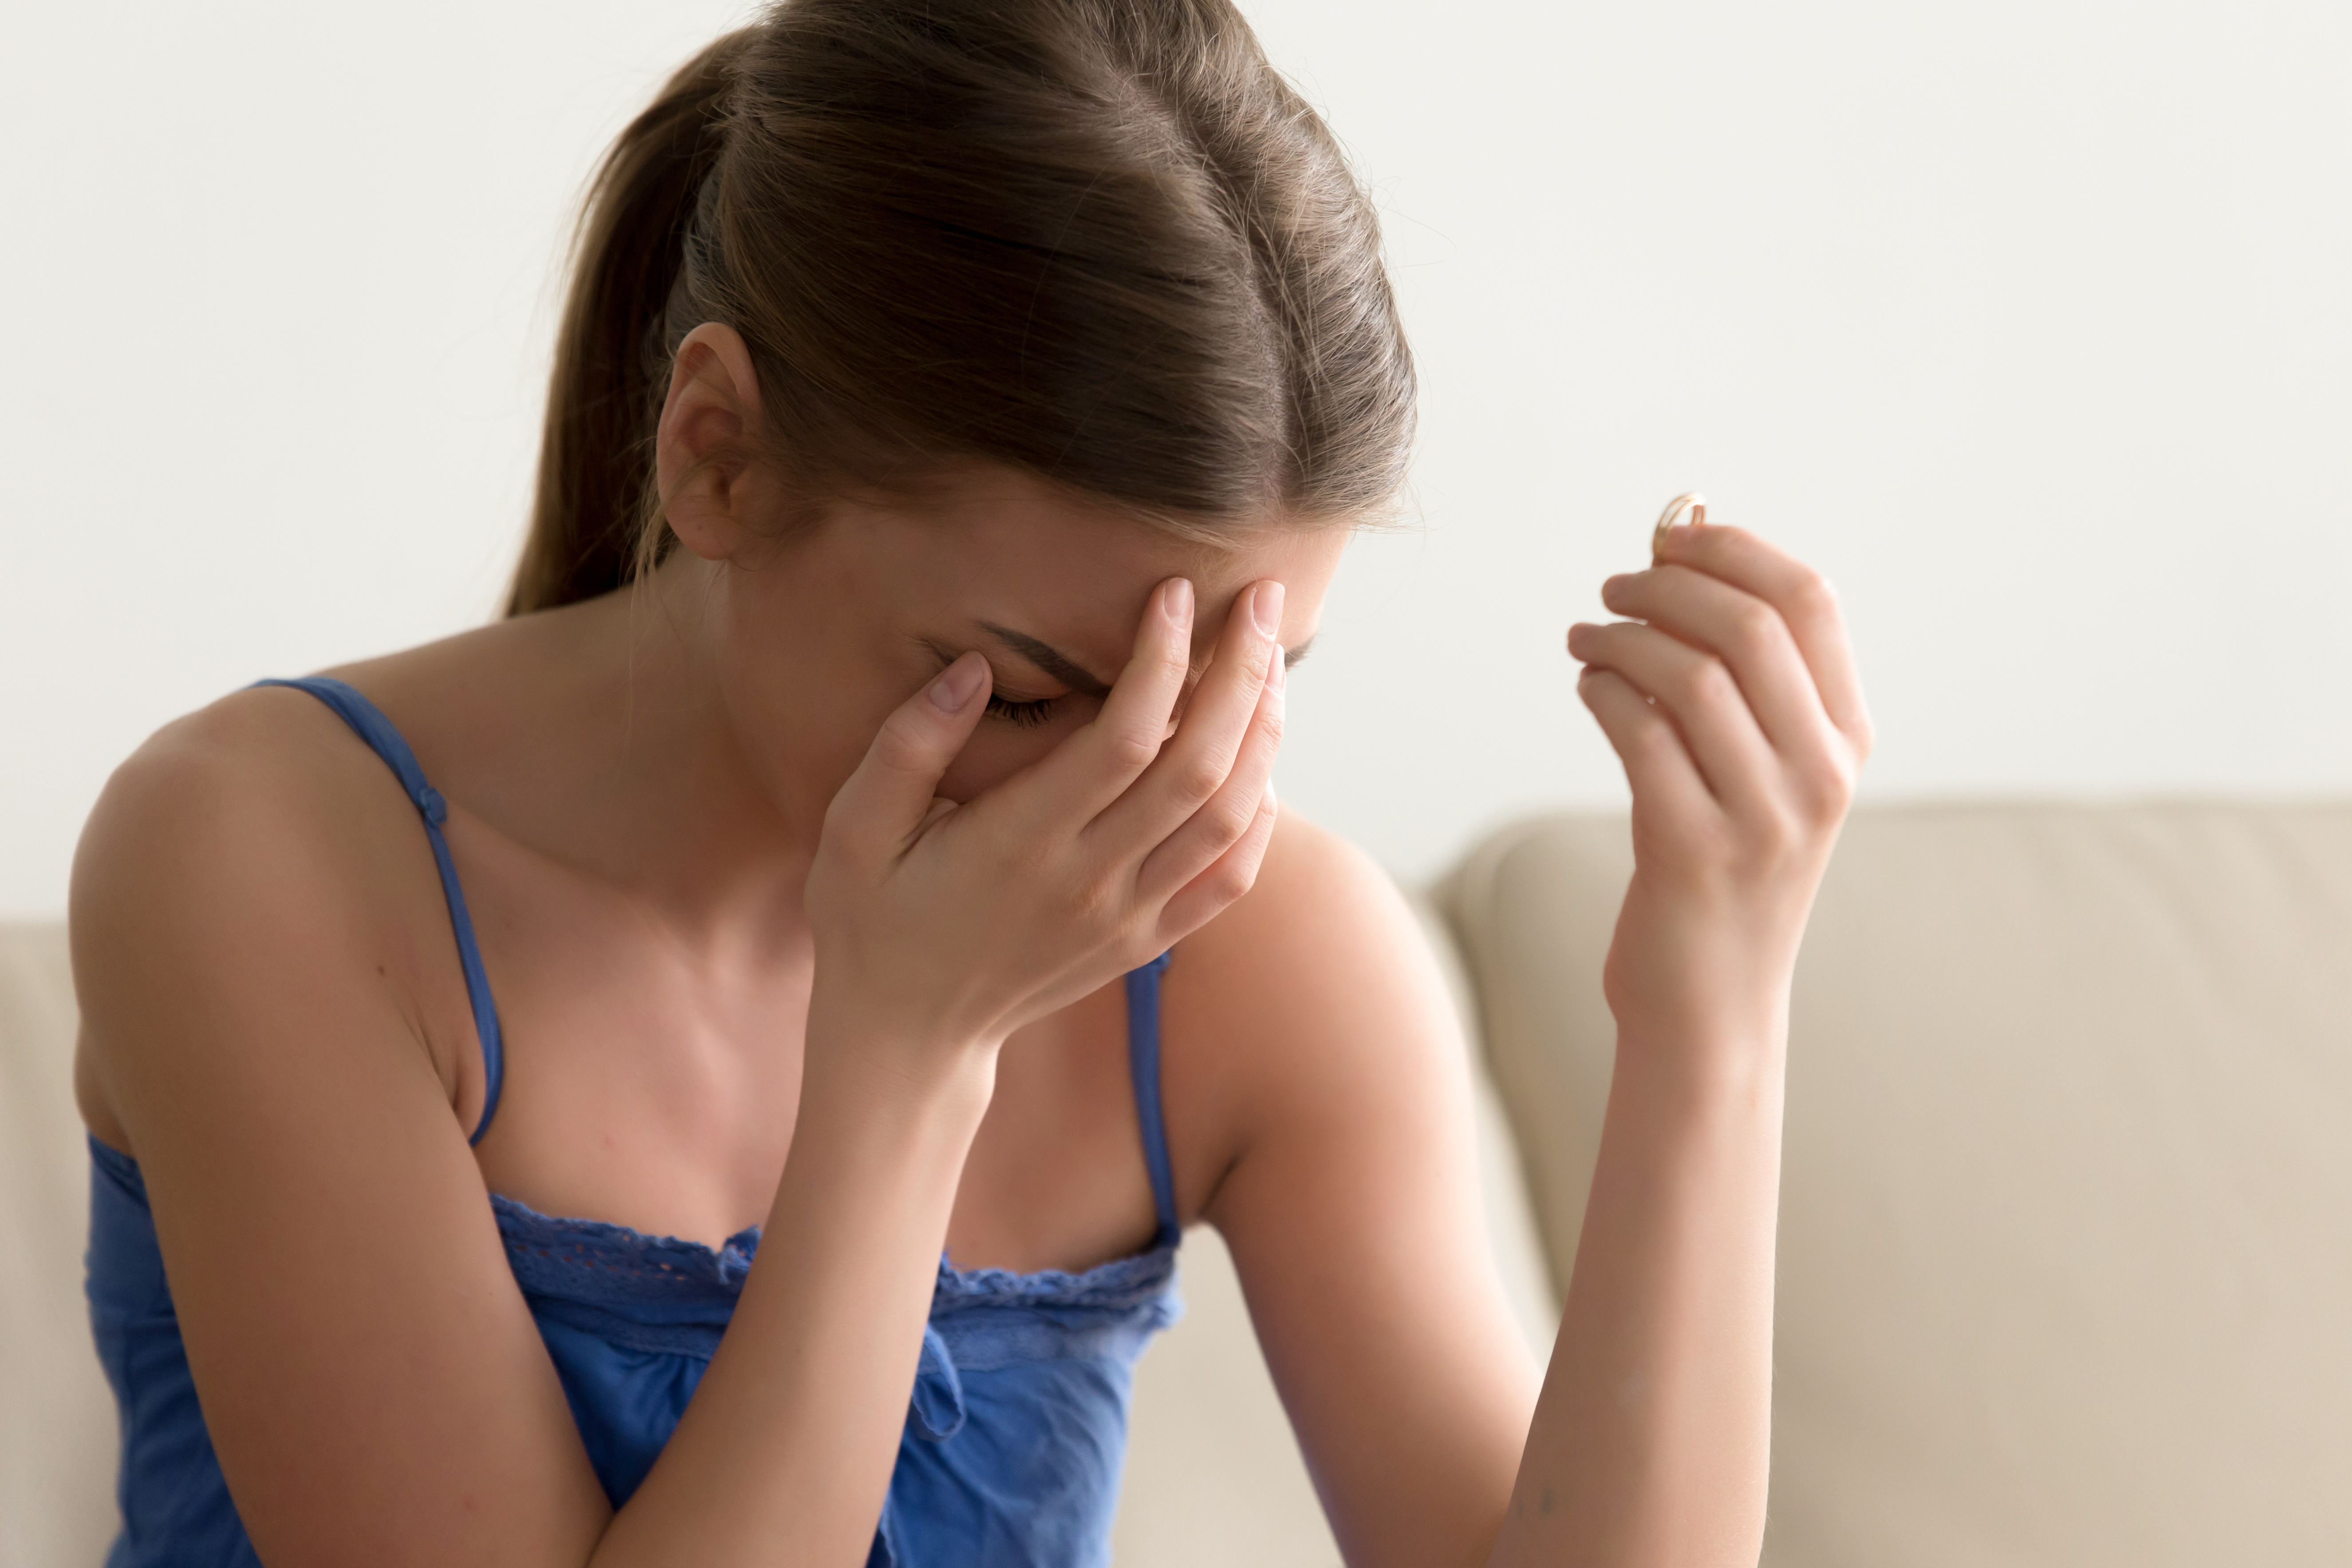 Woman crying while holding her engagement ring | Source: Shutterstock